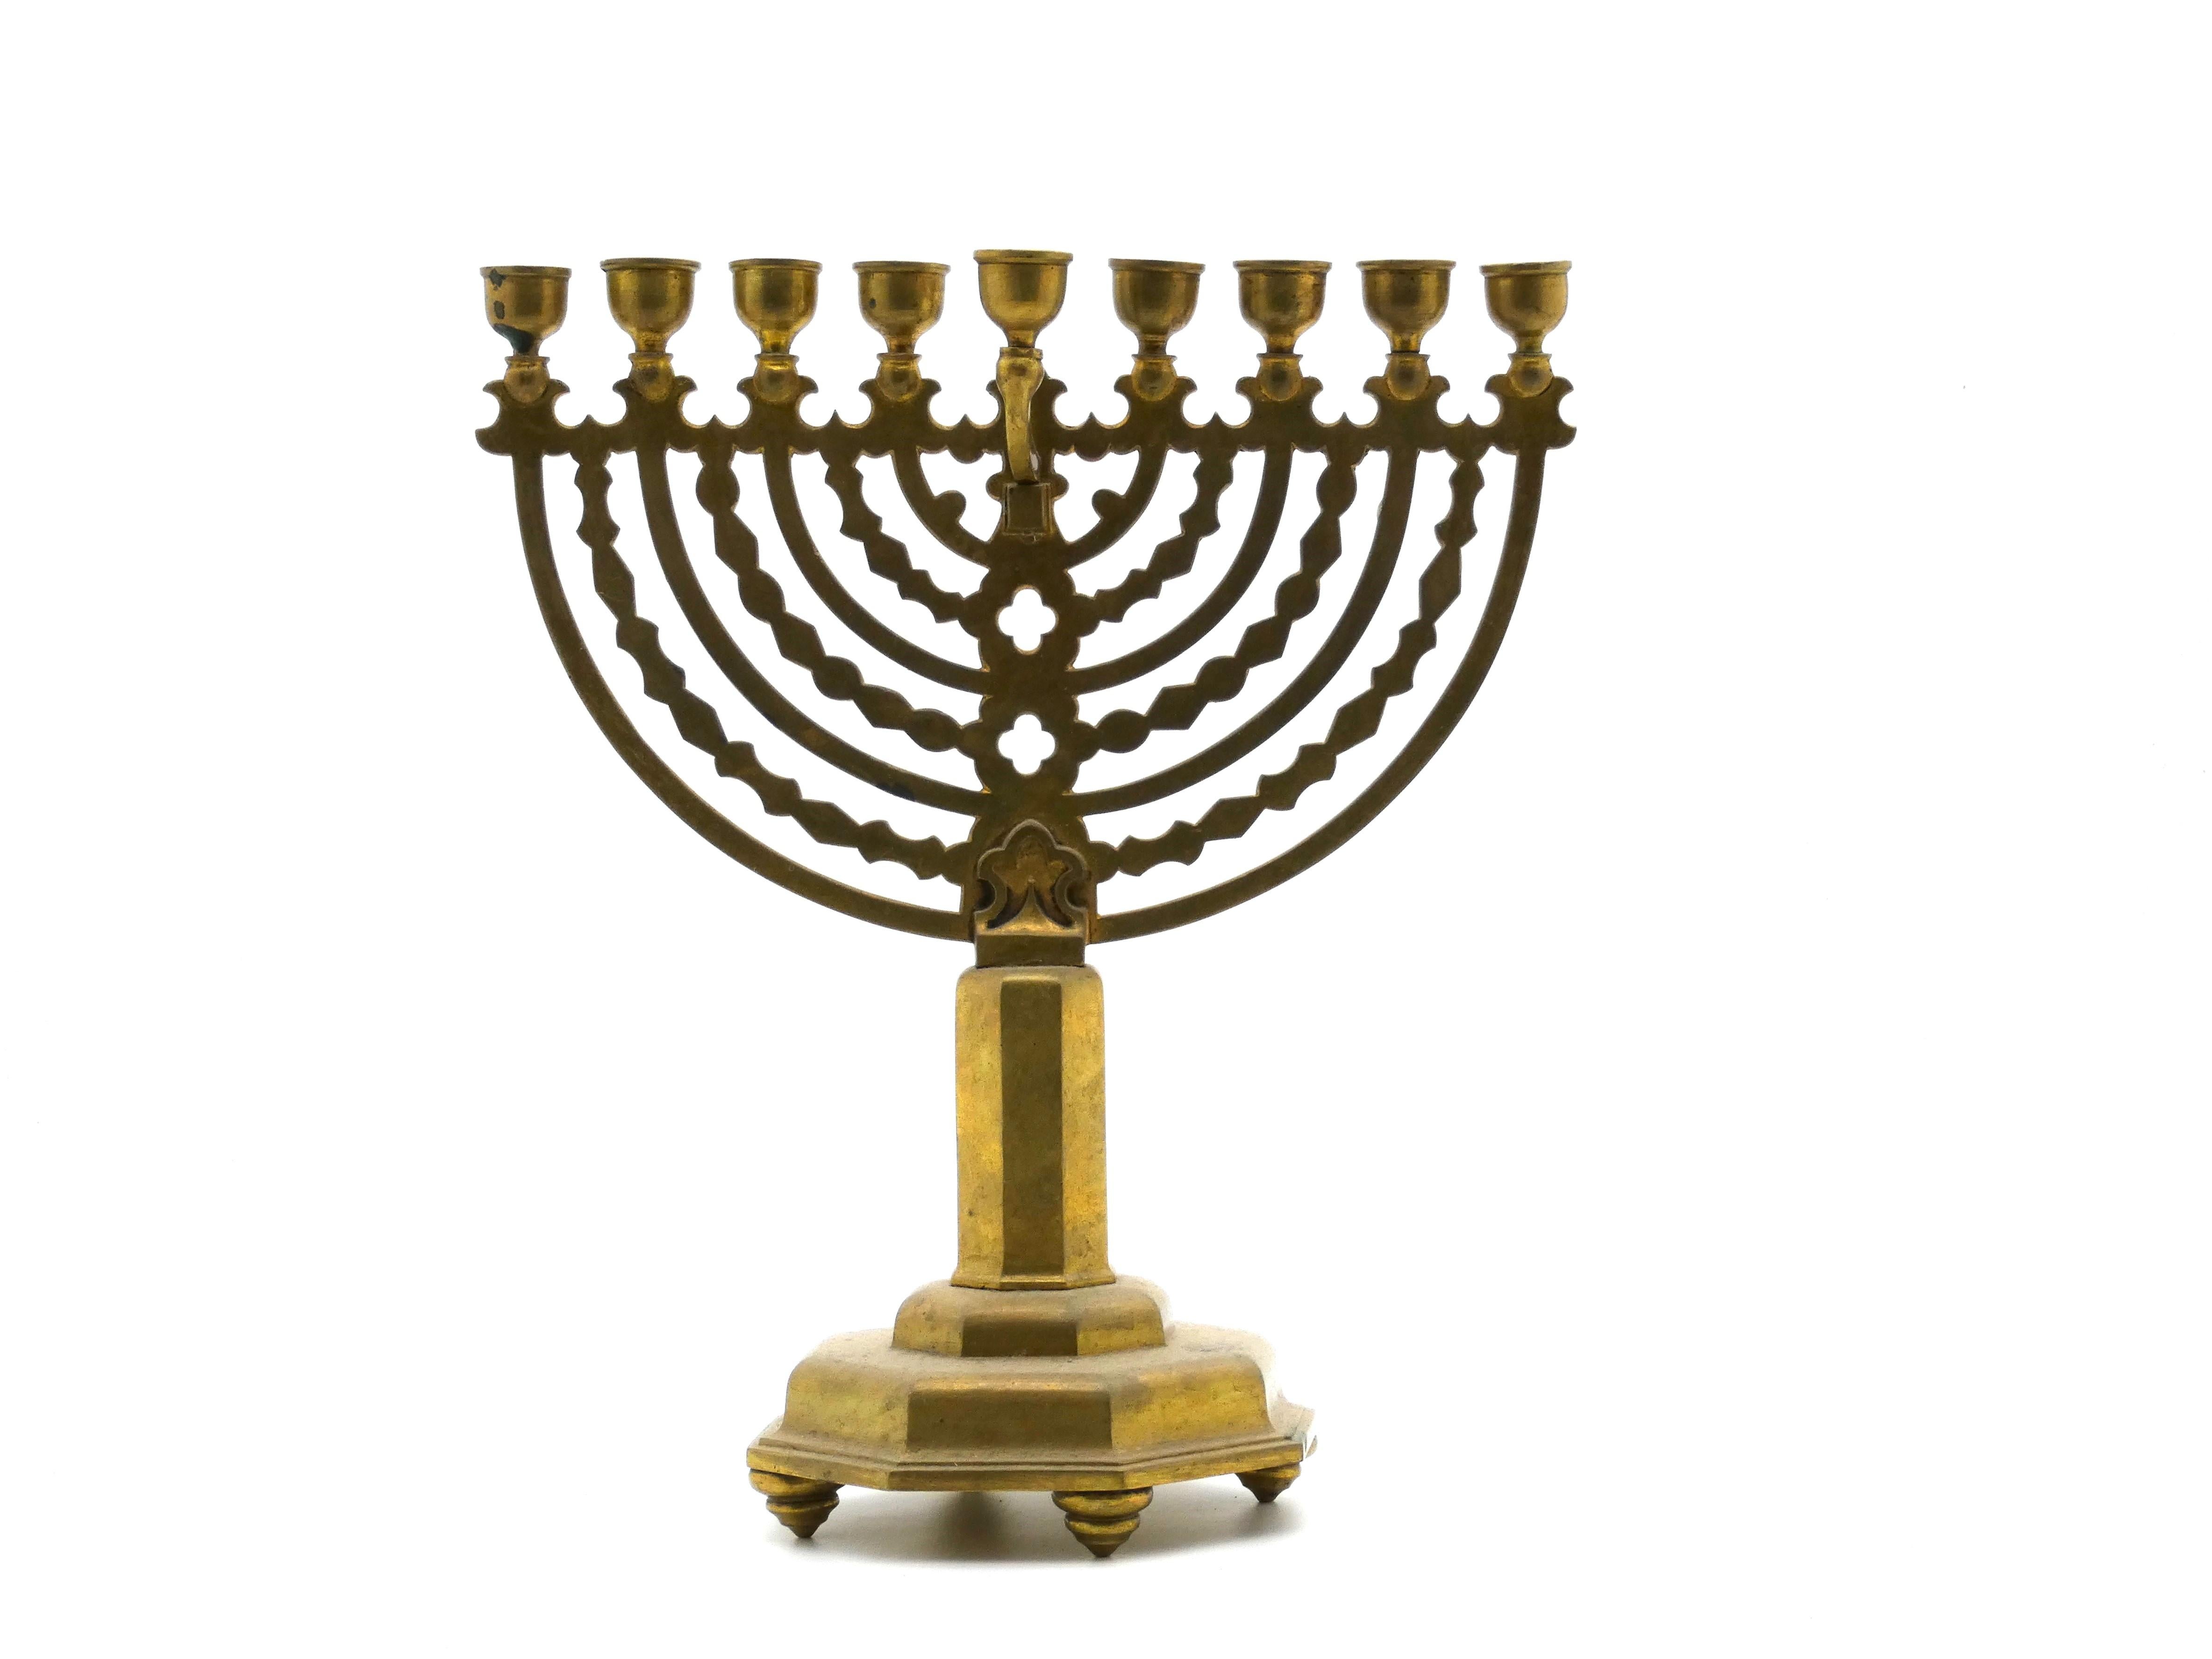 This German brass Menorah is indicative of the neo-gothic style of that period and suggests a date around the turn of the twentieth century.

Hanukkah menorah rests on an octagonal stepped base supported by four flywheel-shaped legs. 

Base is